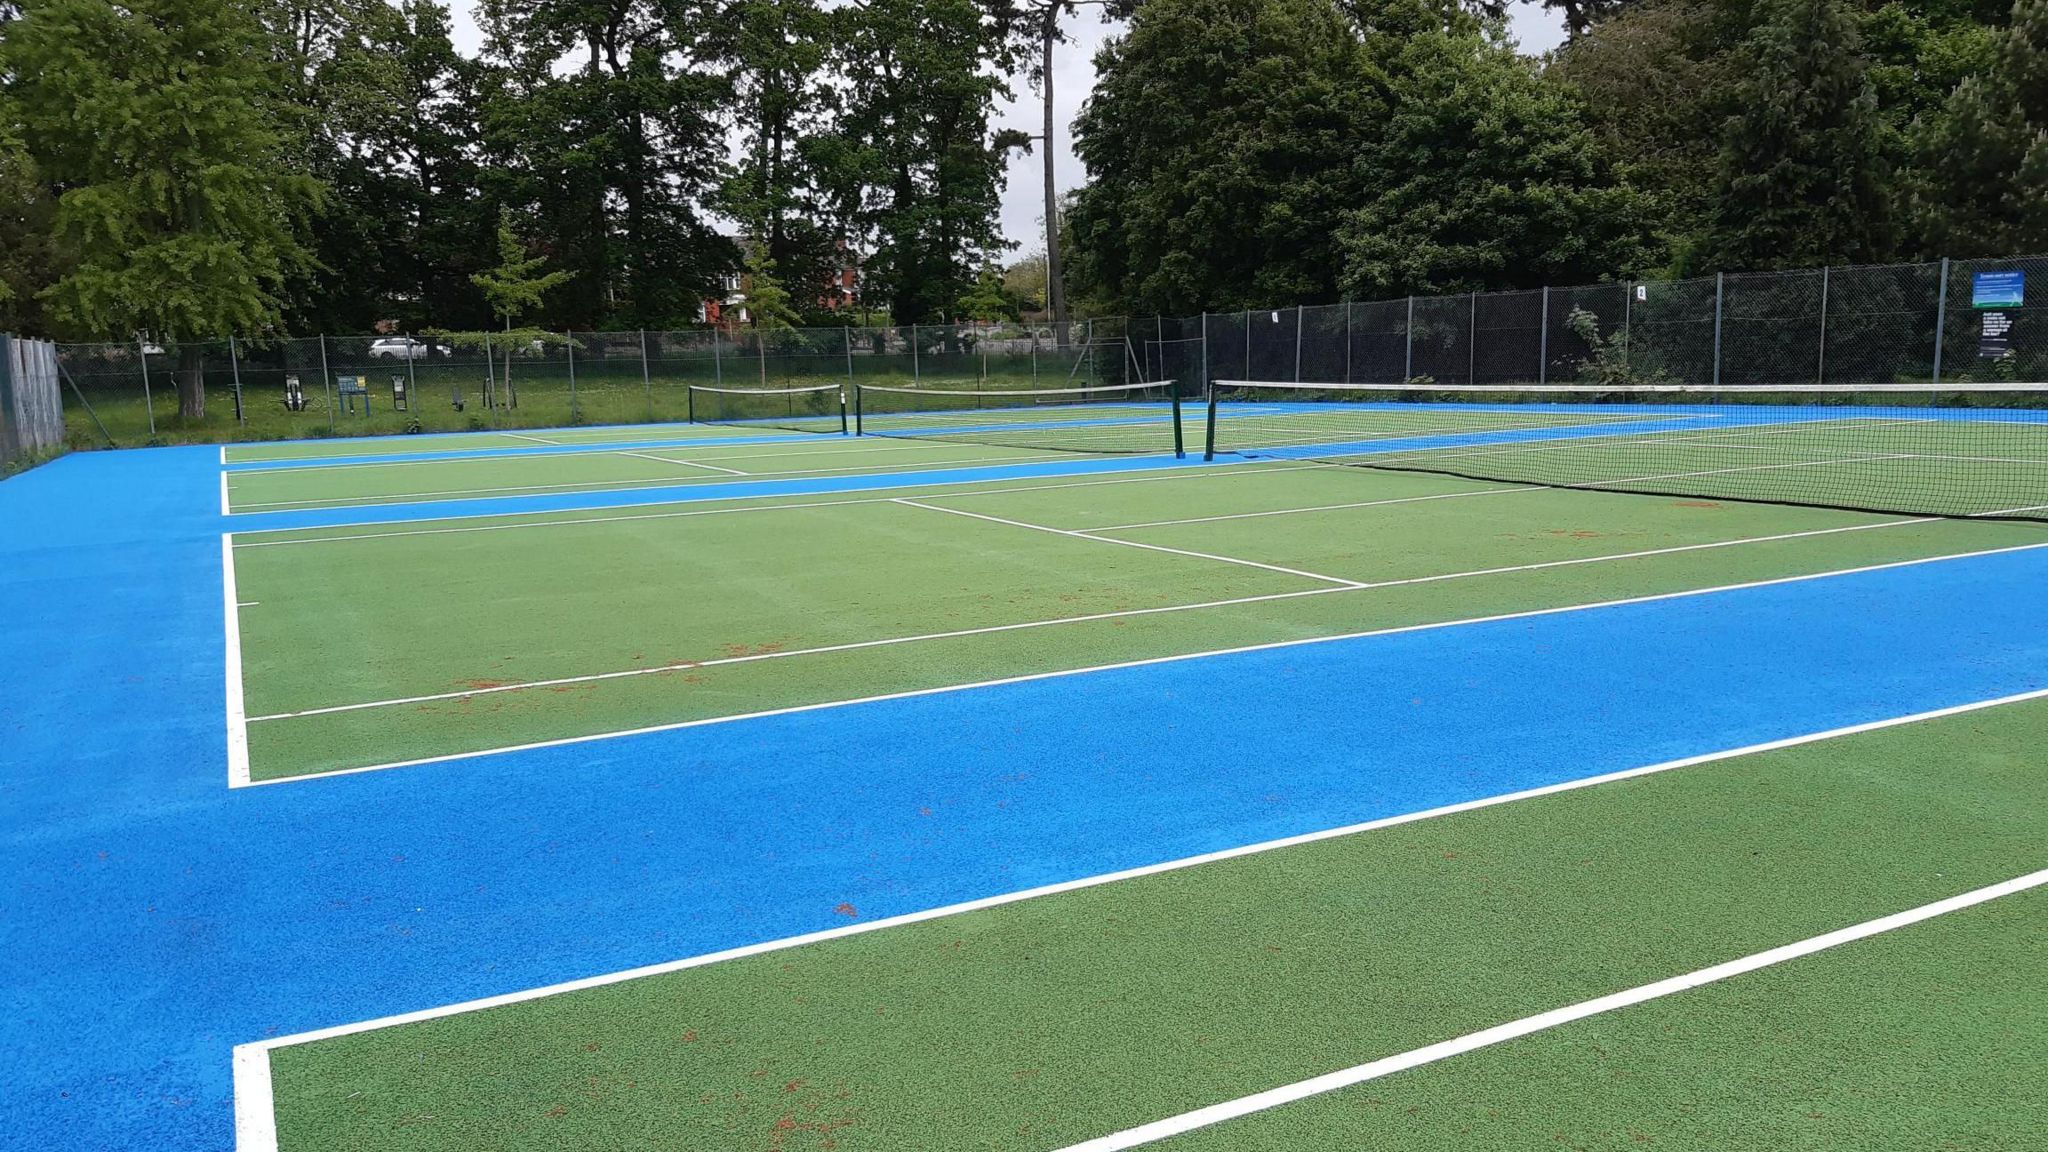 New look tennis court in Leicester